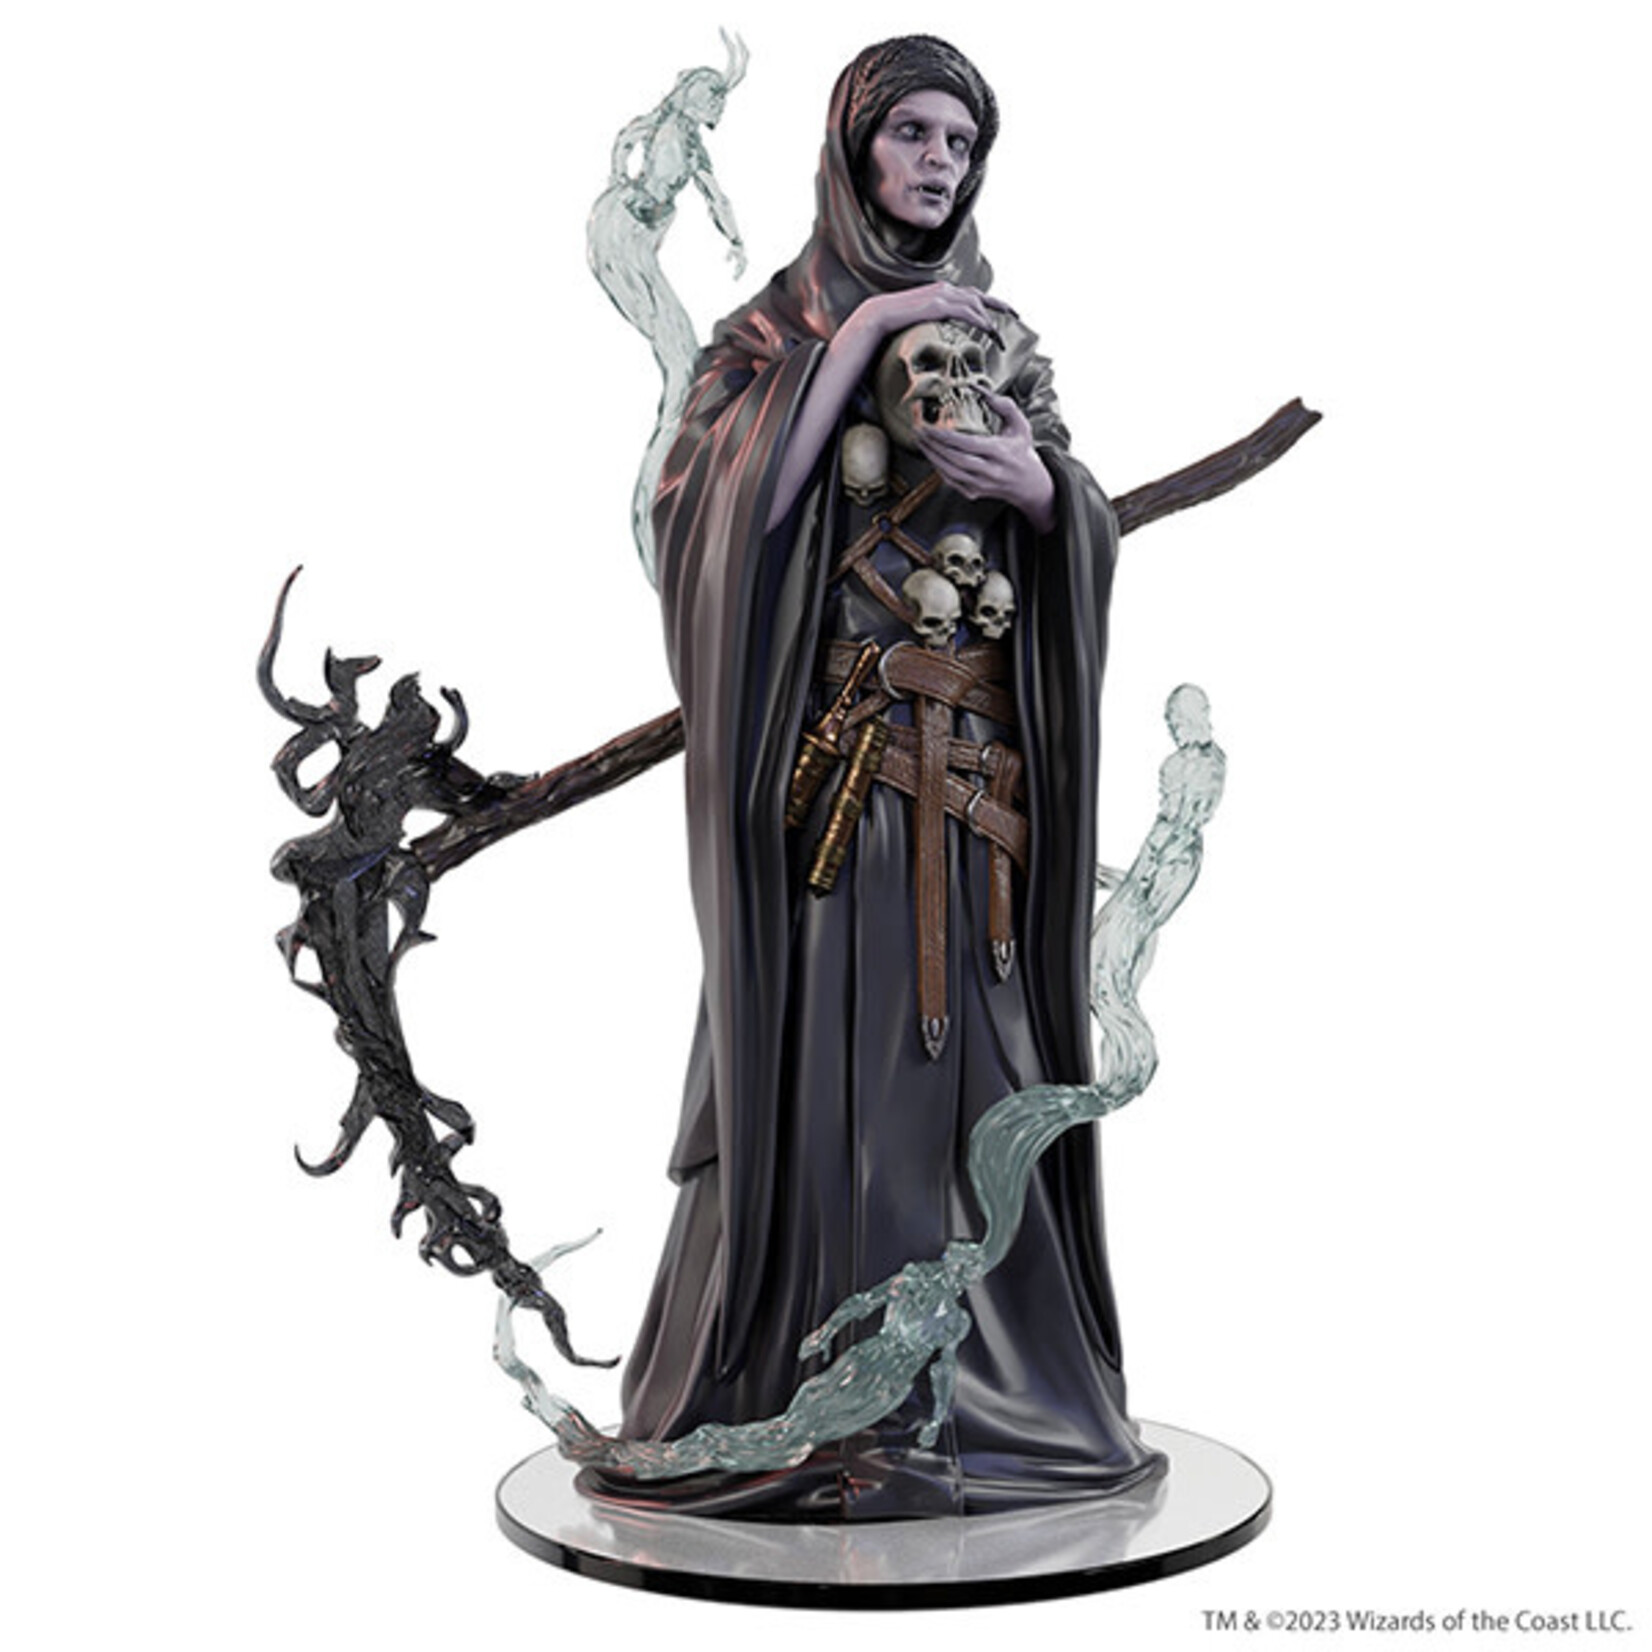 WizKids D&D Icons of the Realms: Bigby Presents: Glory of the Giants - Death Giant Necromancer Boxed Miniature